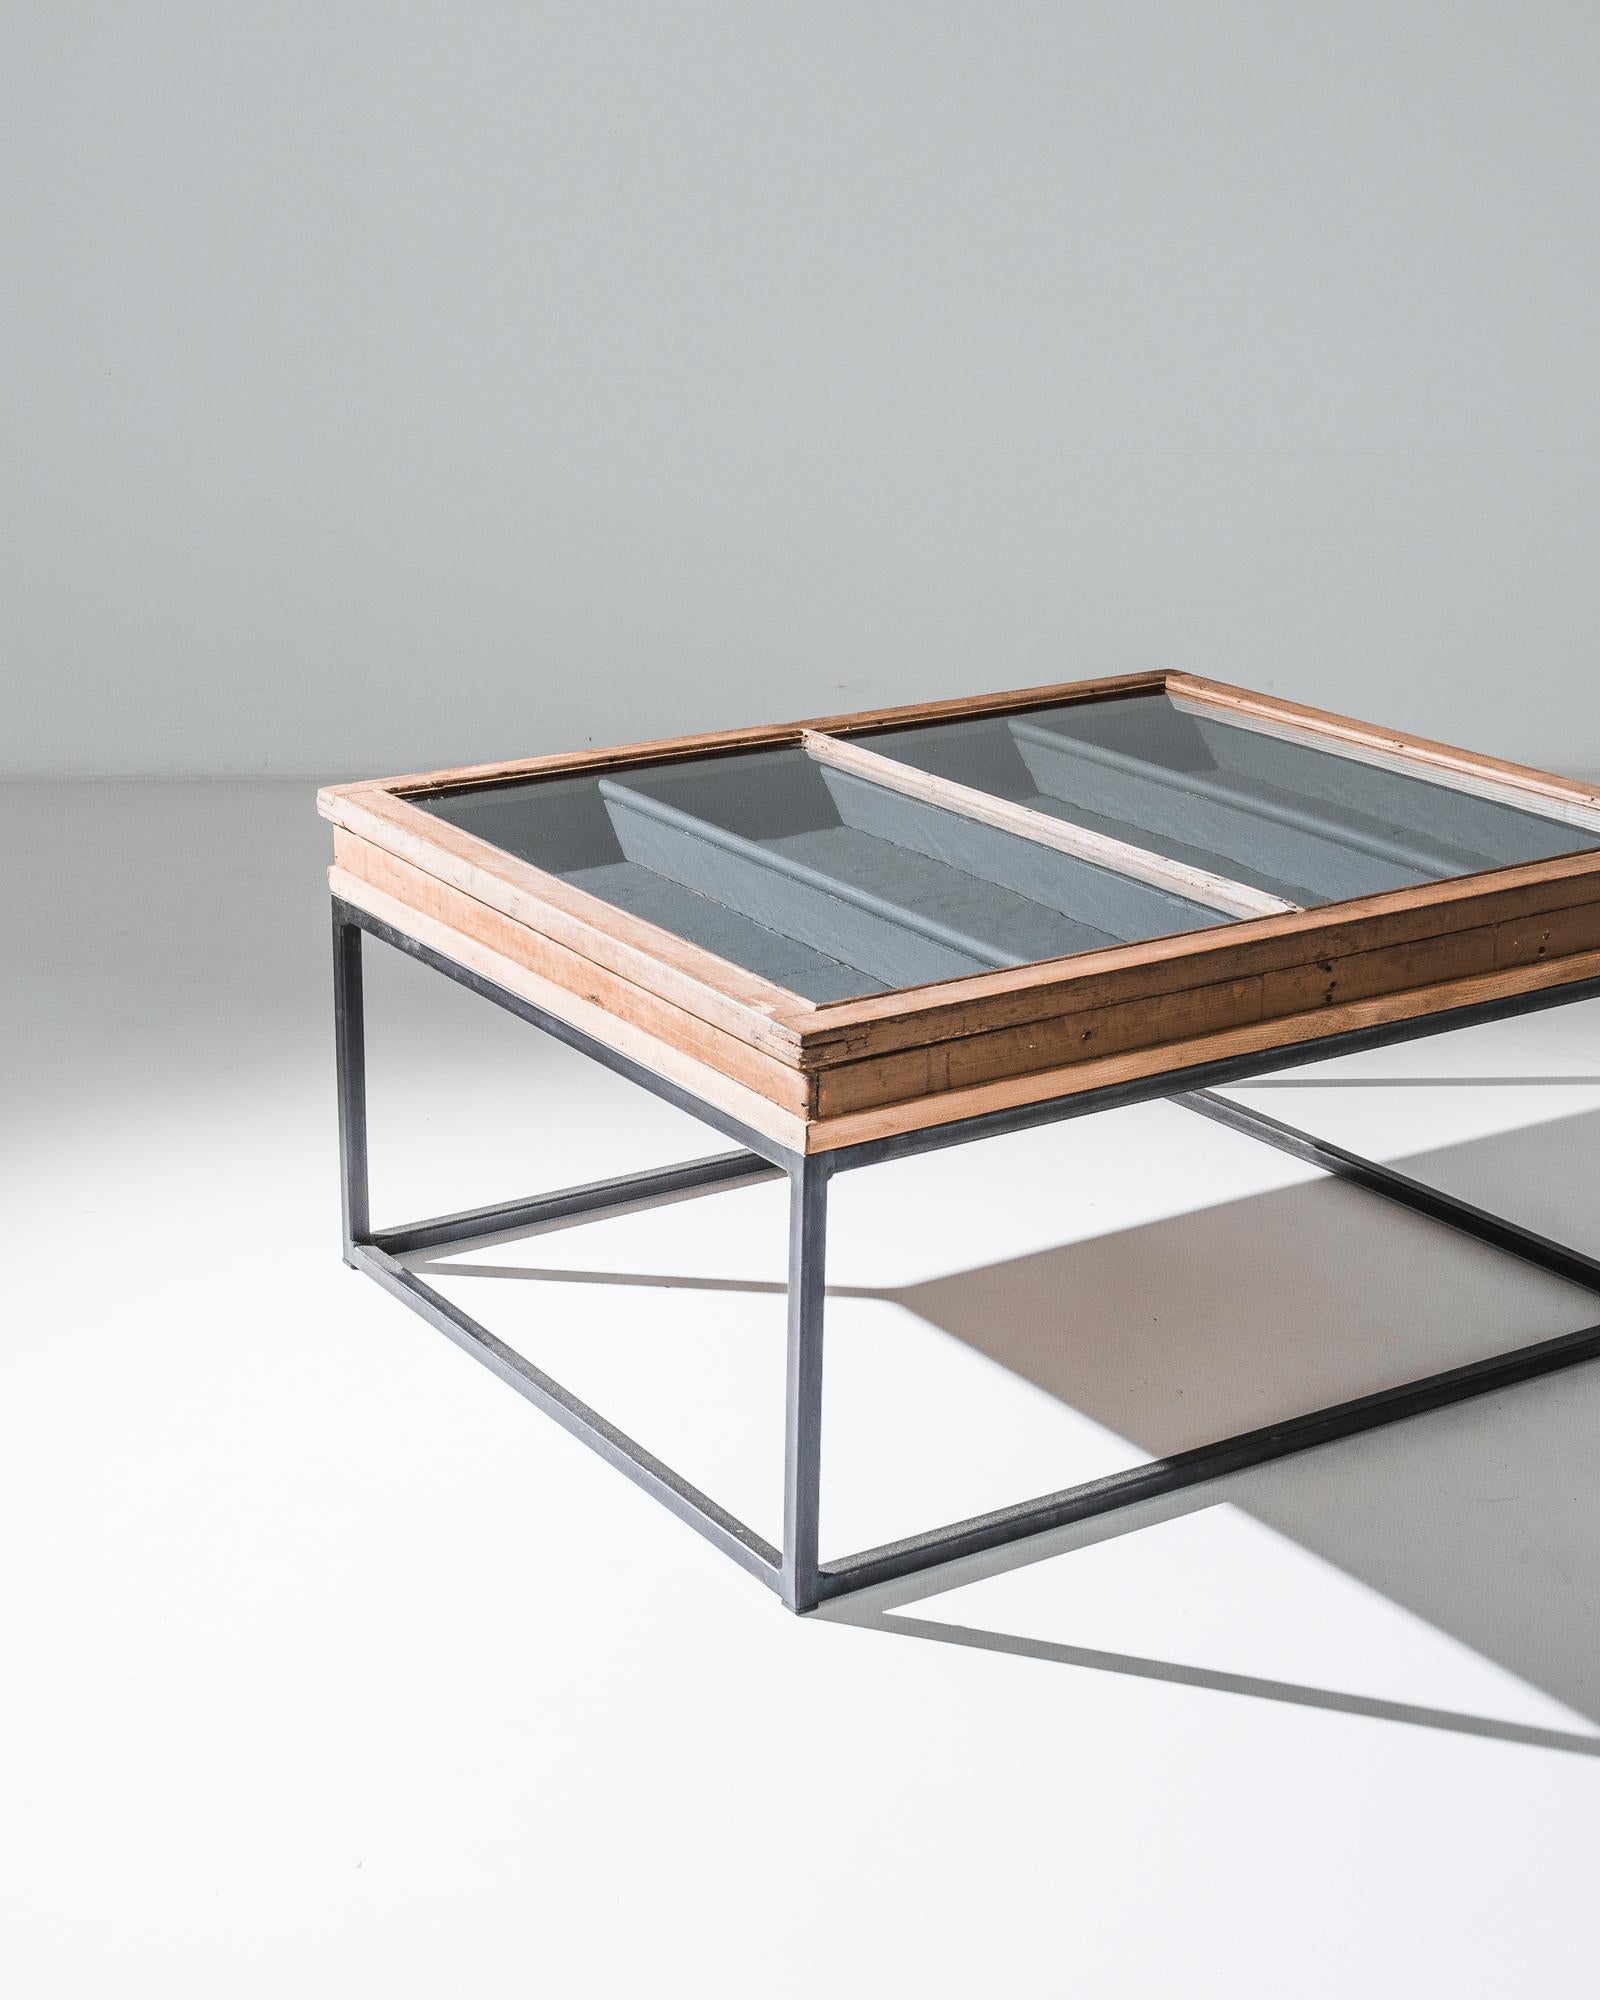 A metal coffee table with glass and wood tabletop from France, produced circa 1900, has been fitted with a metal base in our atelier. Nestled neatly between categories of coffee table and shadow box, this unique antique features a glass top box of